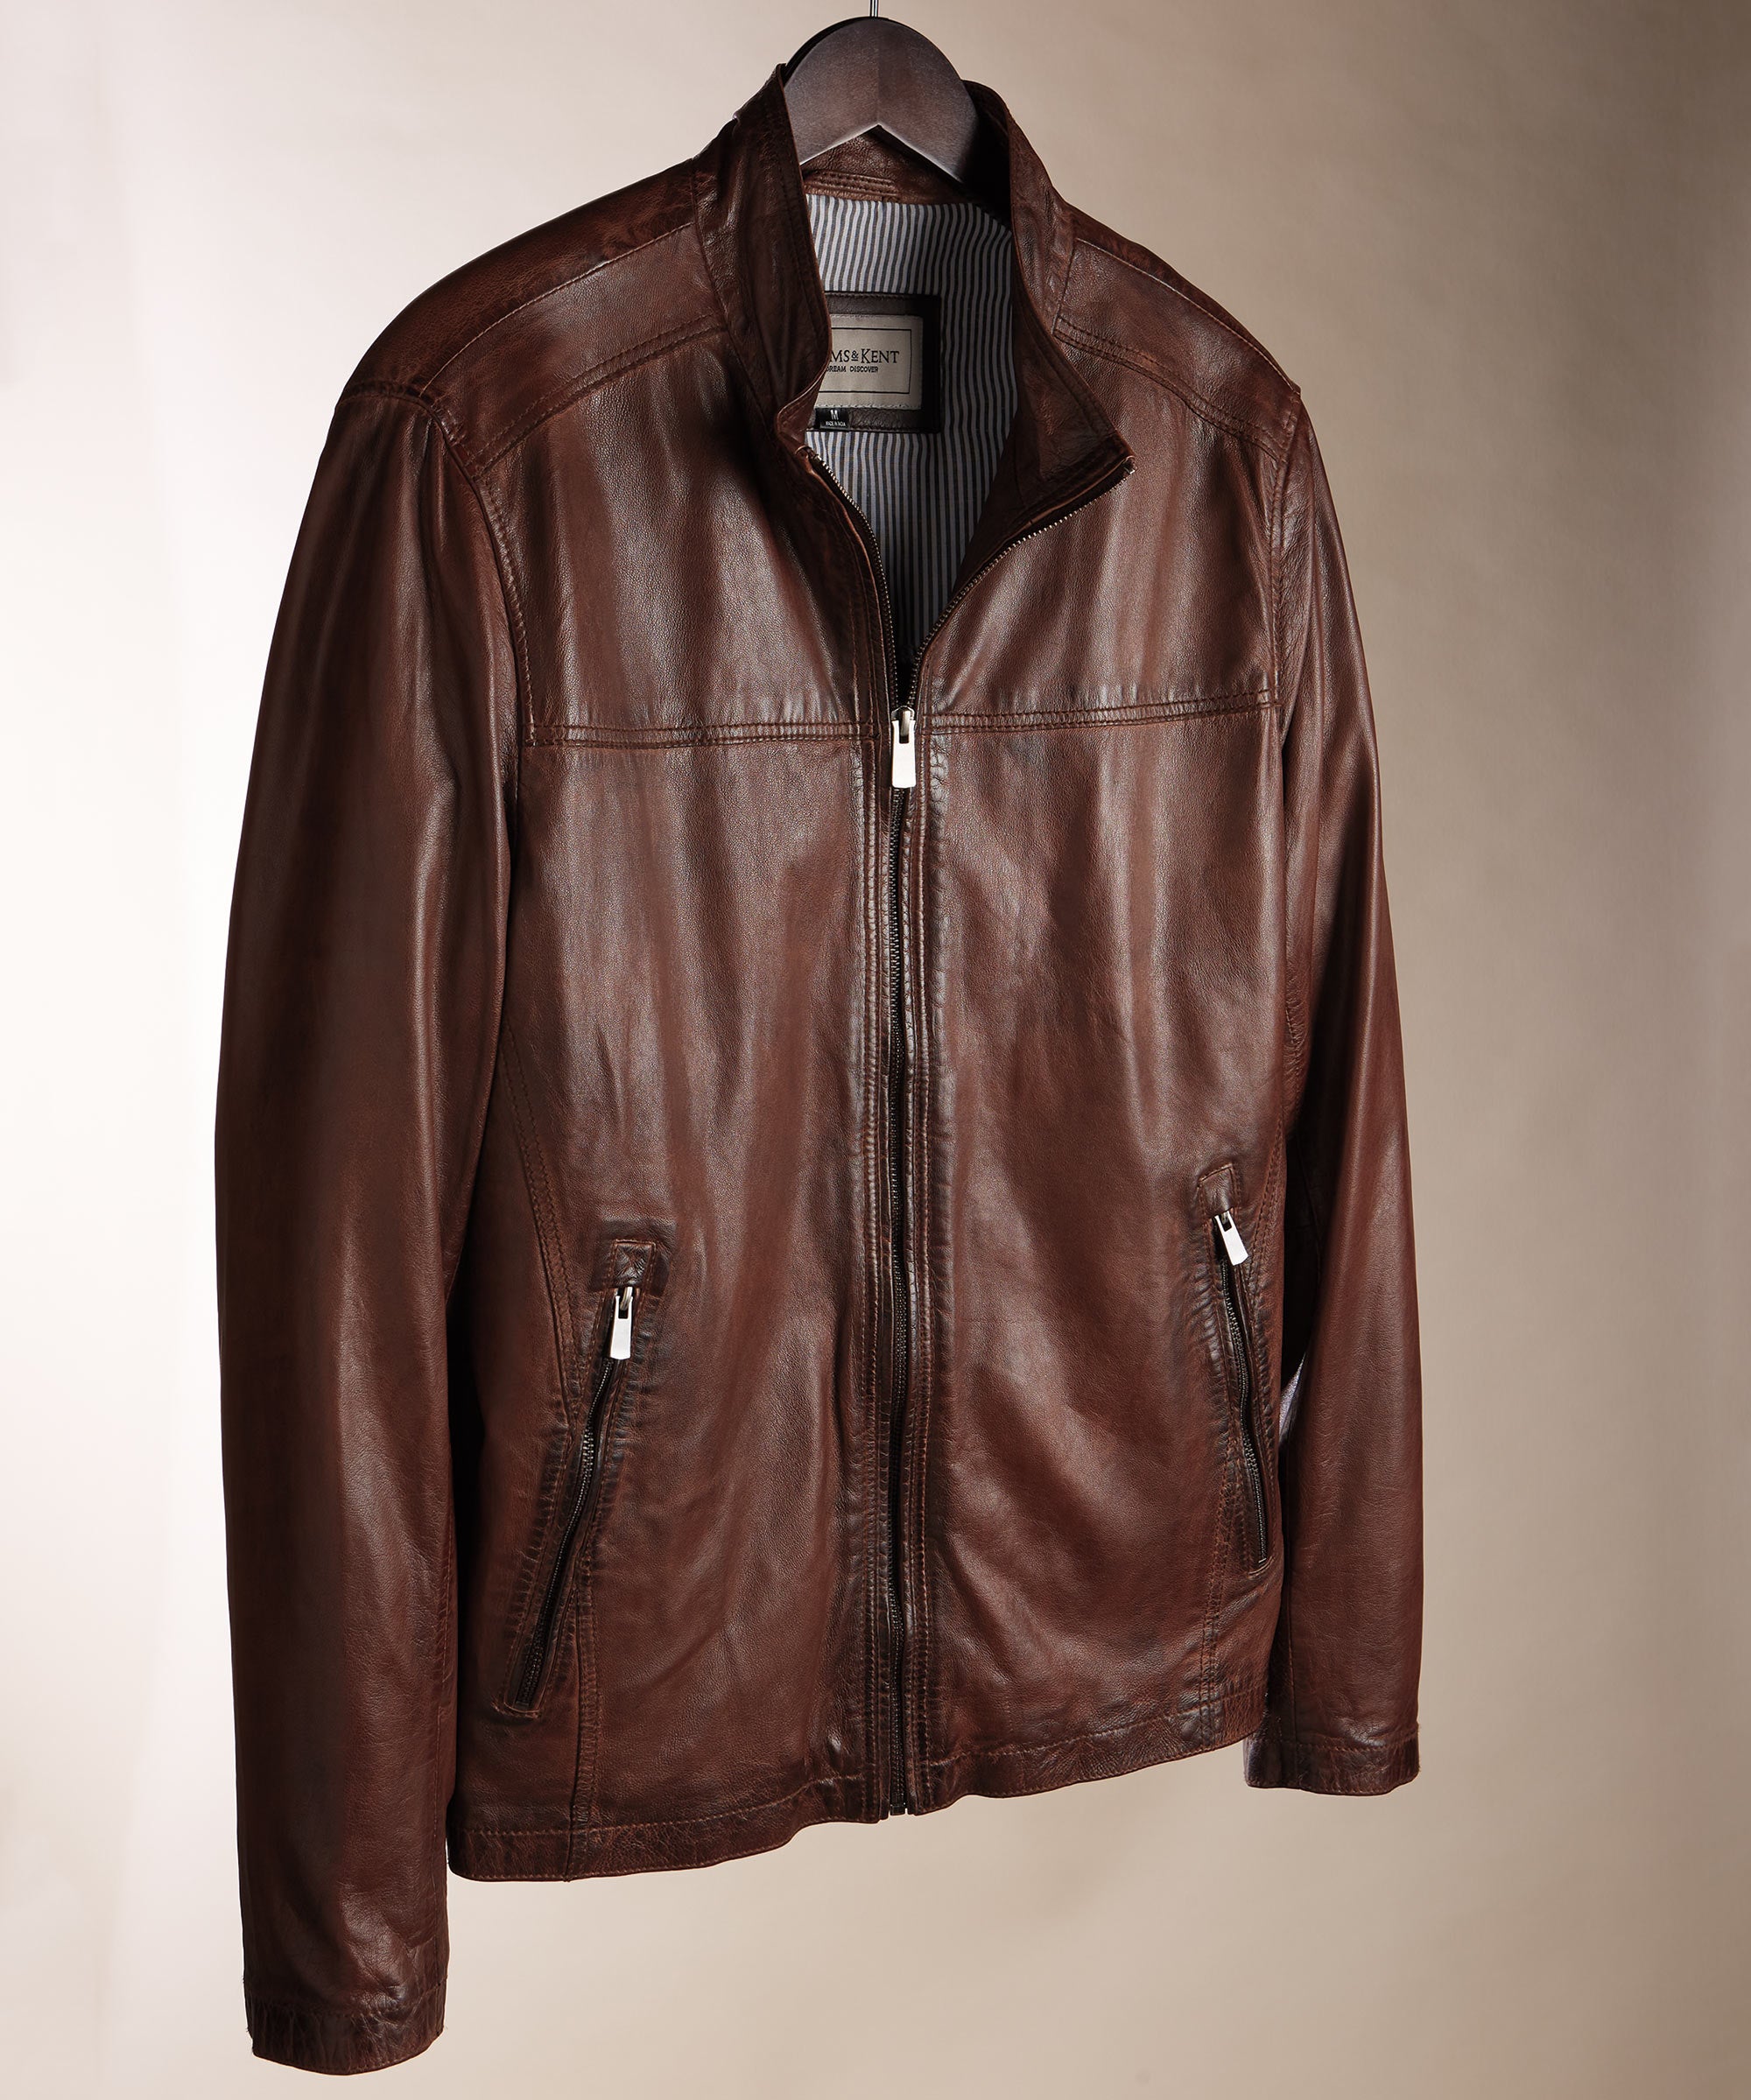 Buy Fitted Perfecto® jacket, lambskin leather man 100% Lambskin leather |  Schott NYC